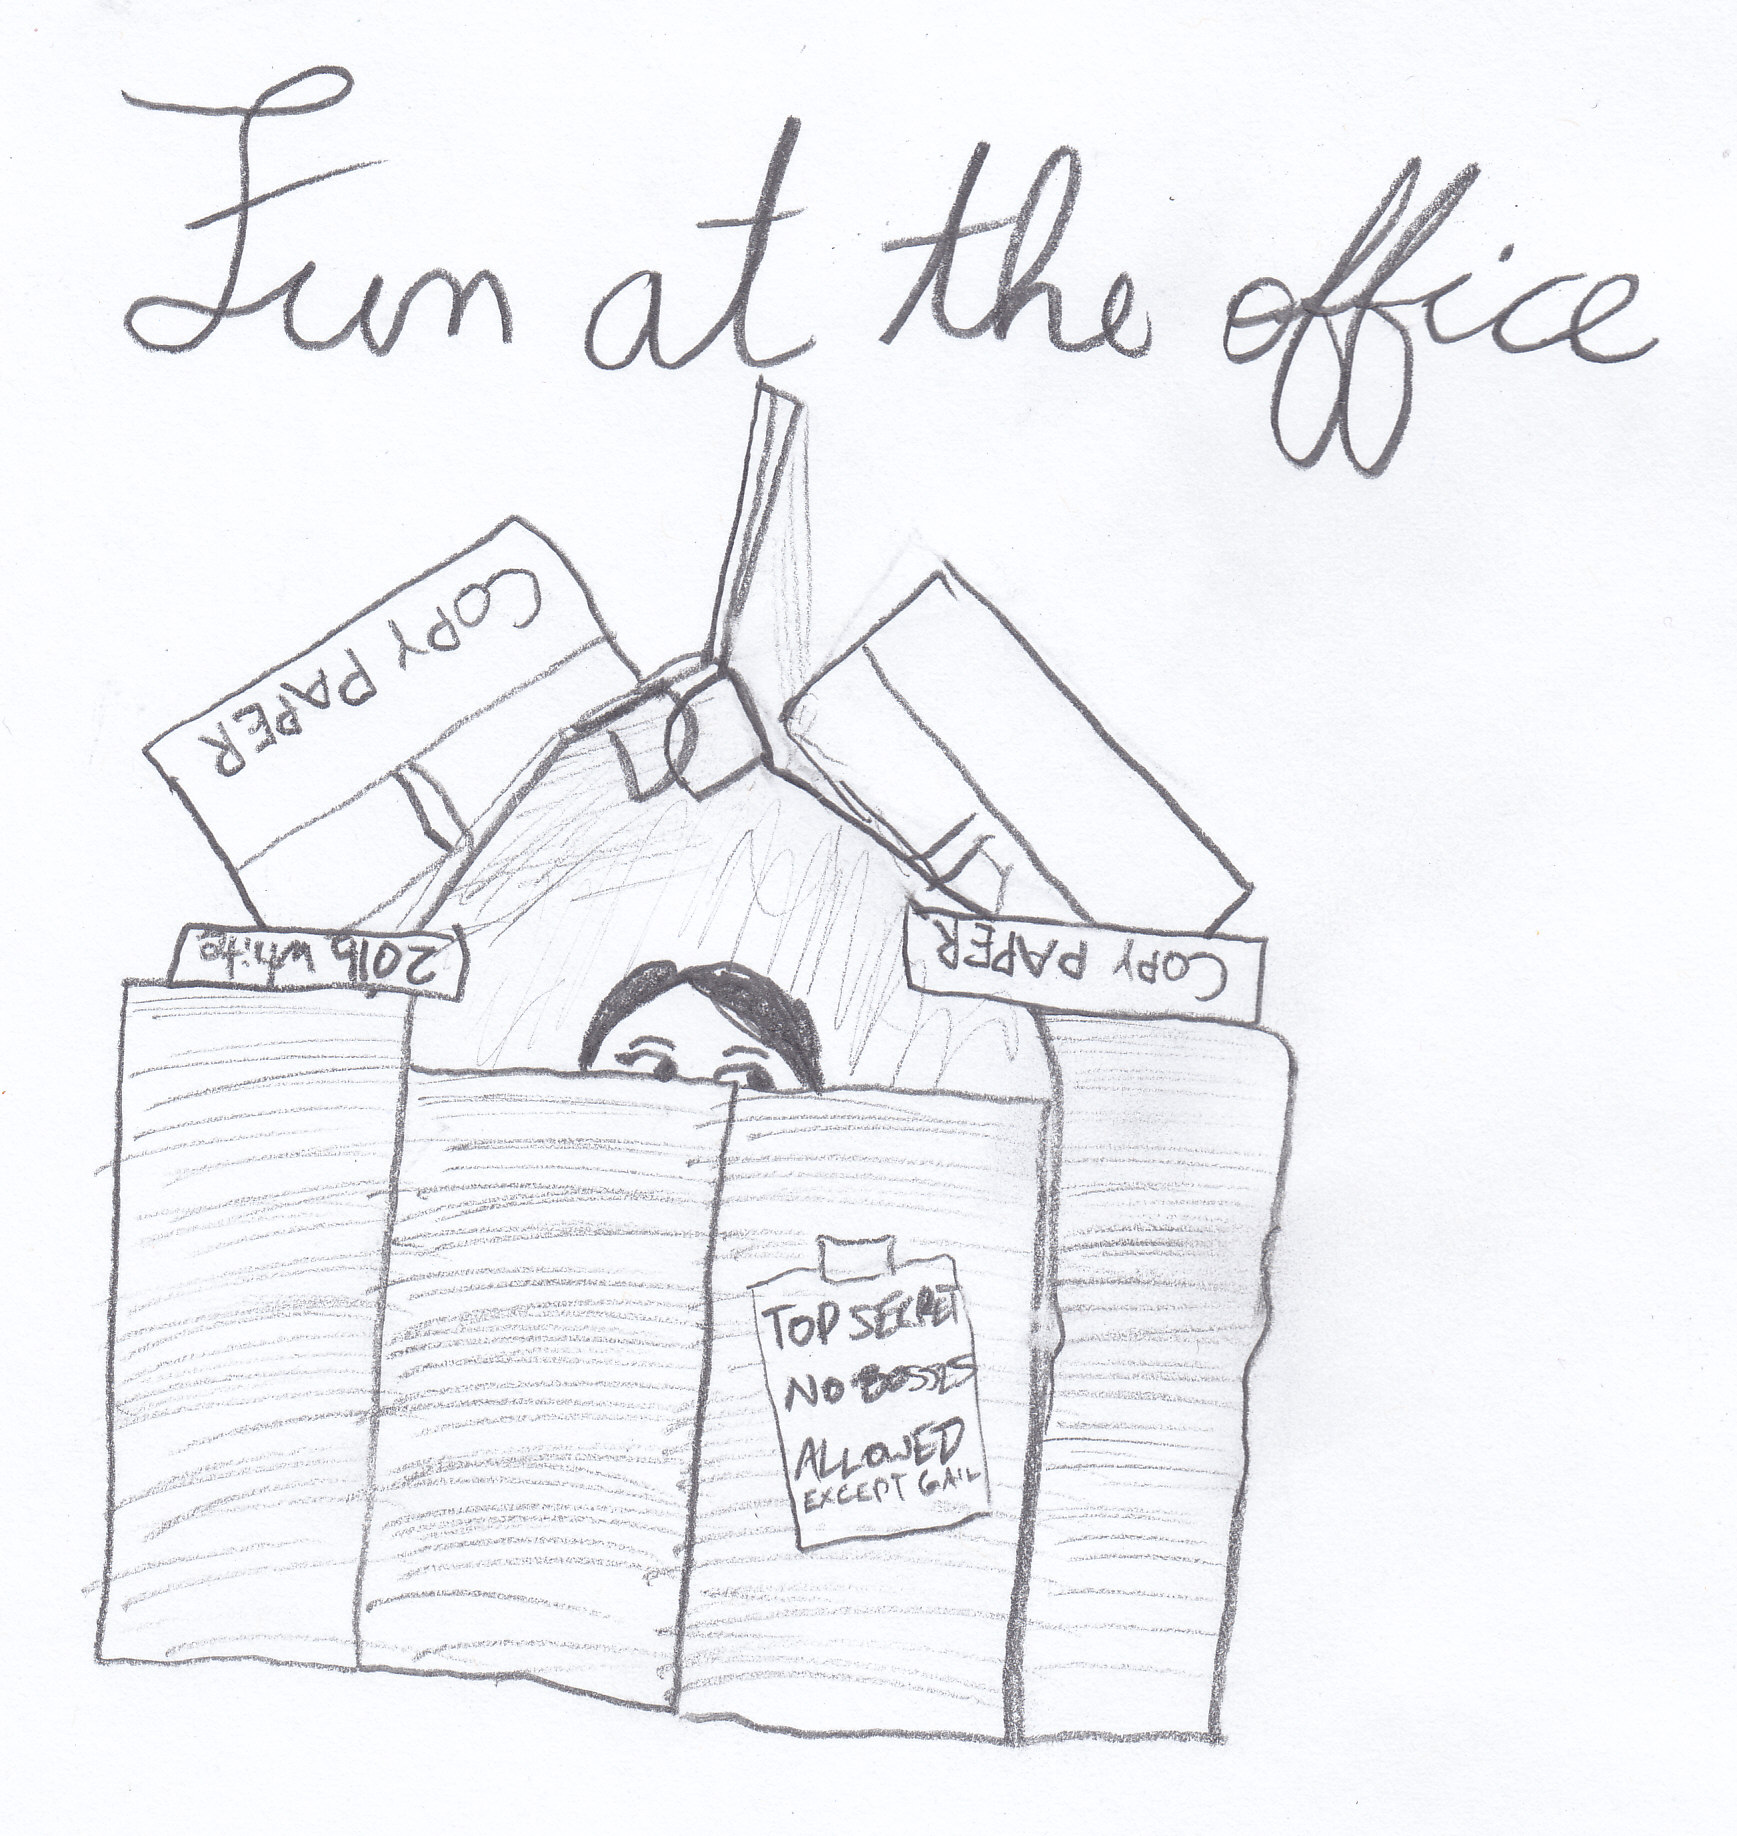 'Fun at the office' written in cursive at the top, with my face looking out of a fort built of office things like boxes of paper